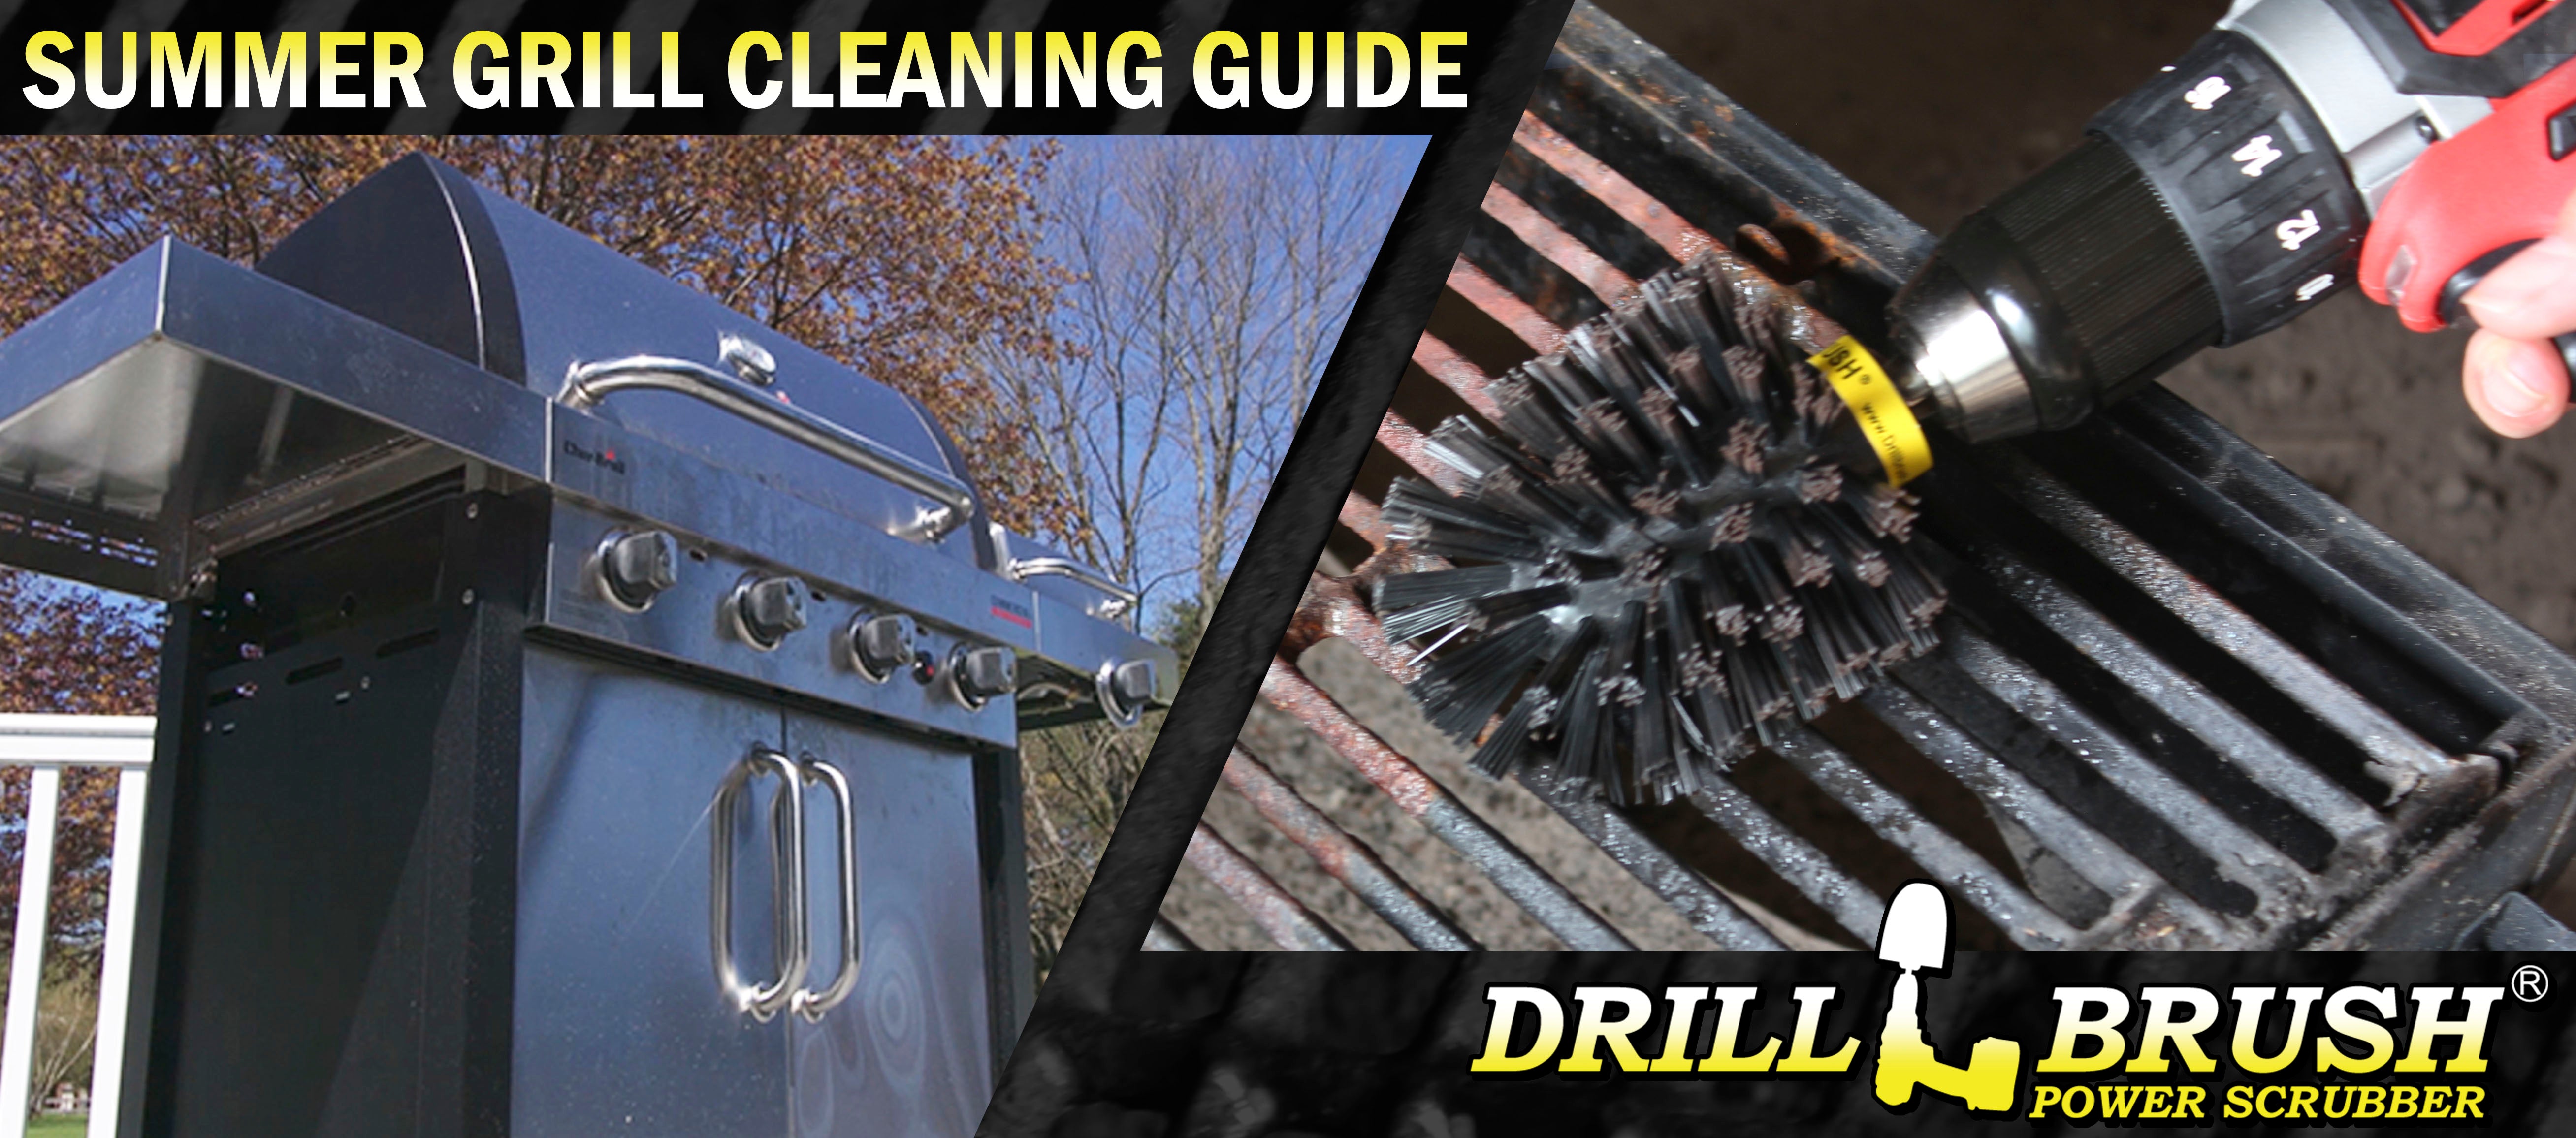 Make Your Grill Look Brand New with These BBQ Cleaning Tips